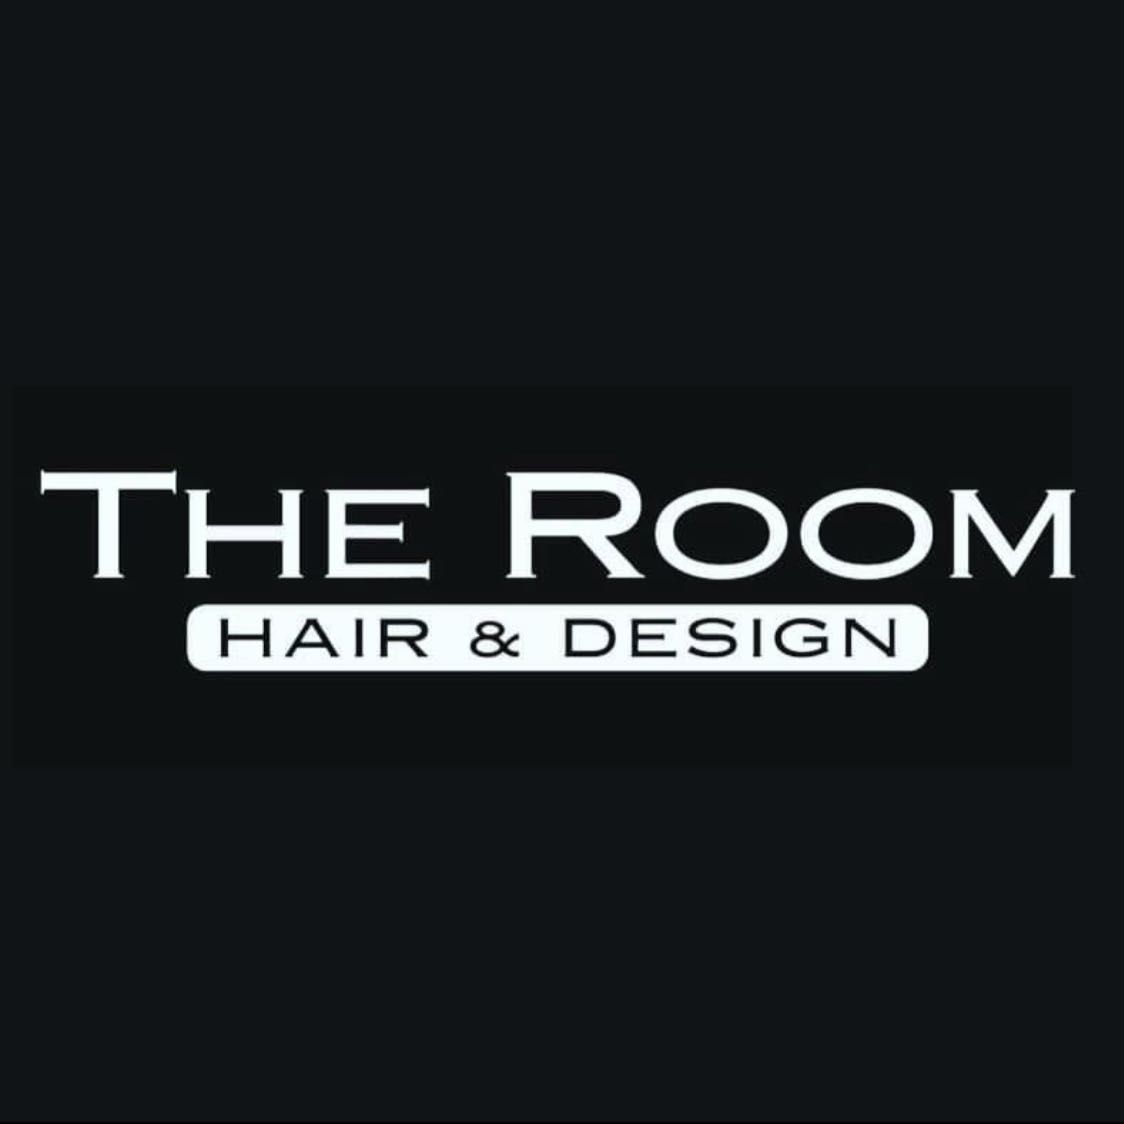 The Room Hair & Design, 470 Forest Ave, Suit 20 A, Plymouth, 48170